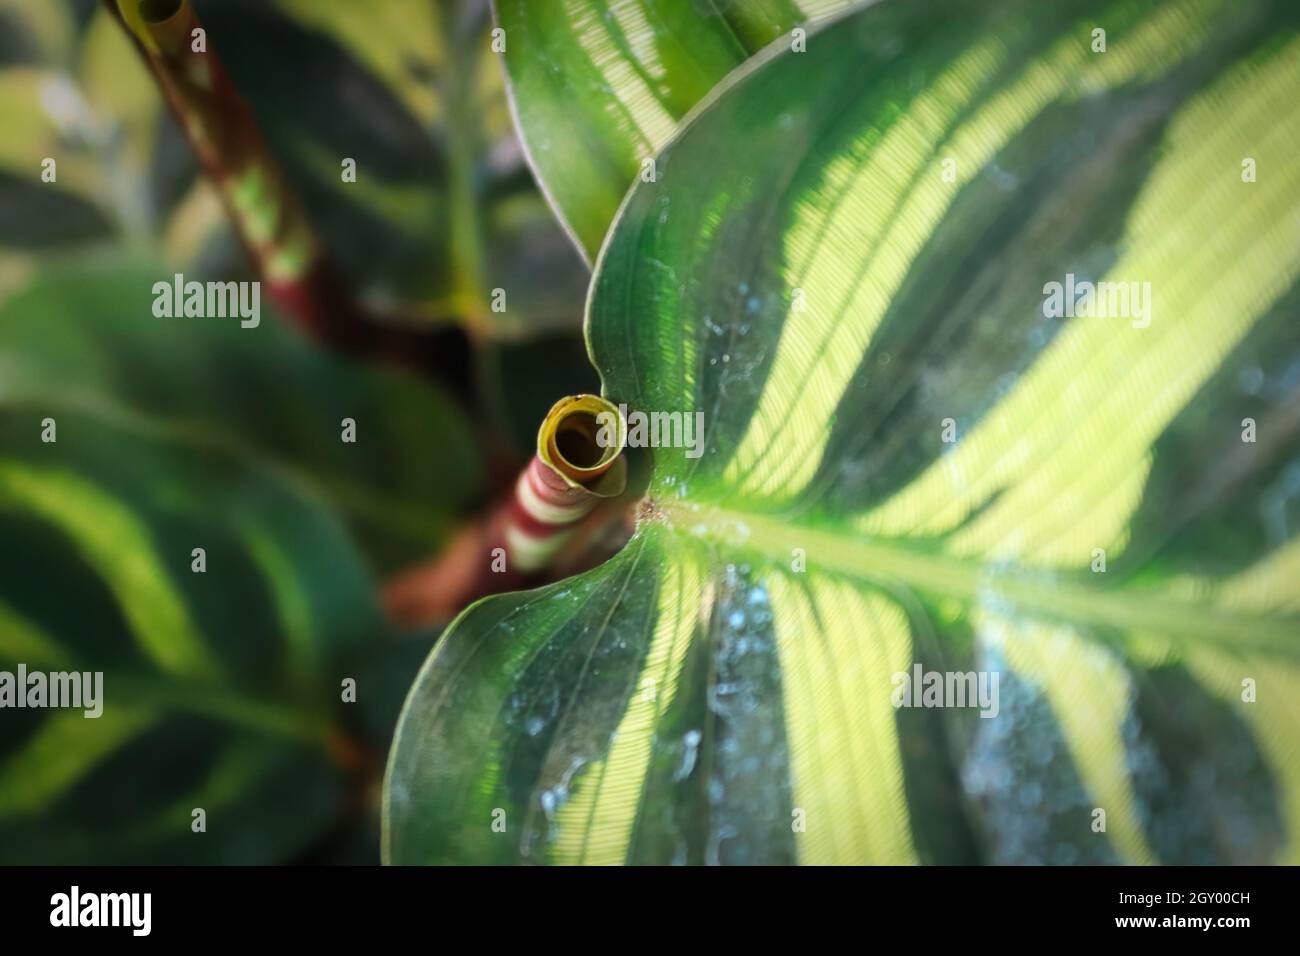 The curled up new leaf on a Calathea plant. Stock Photo